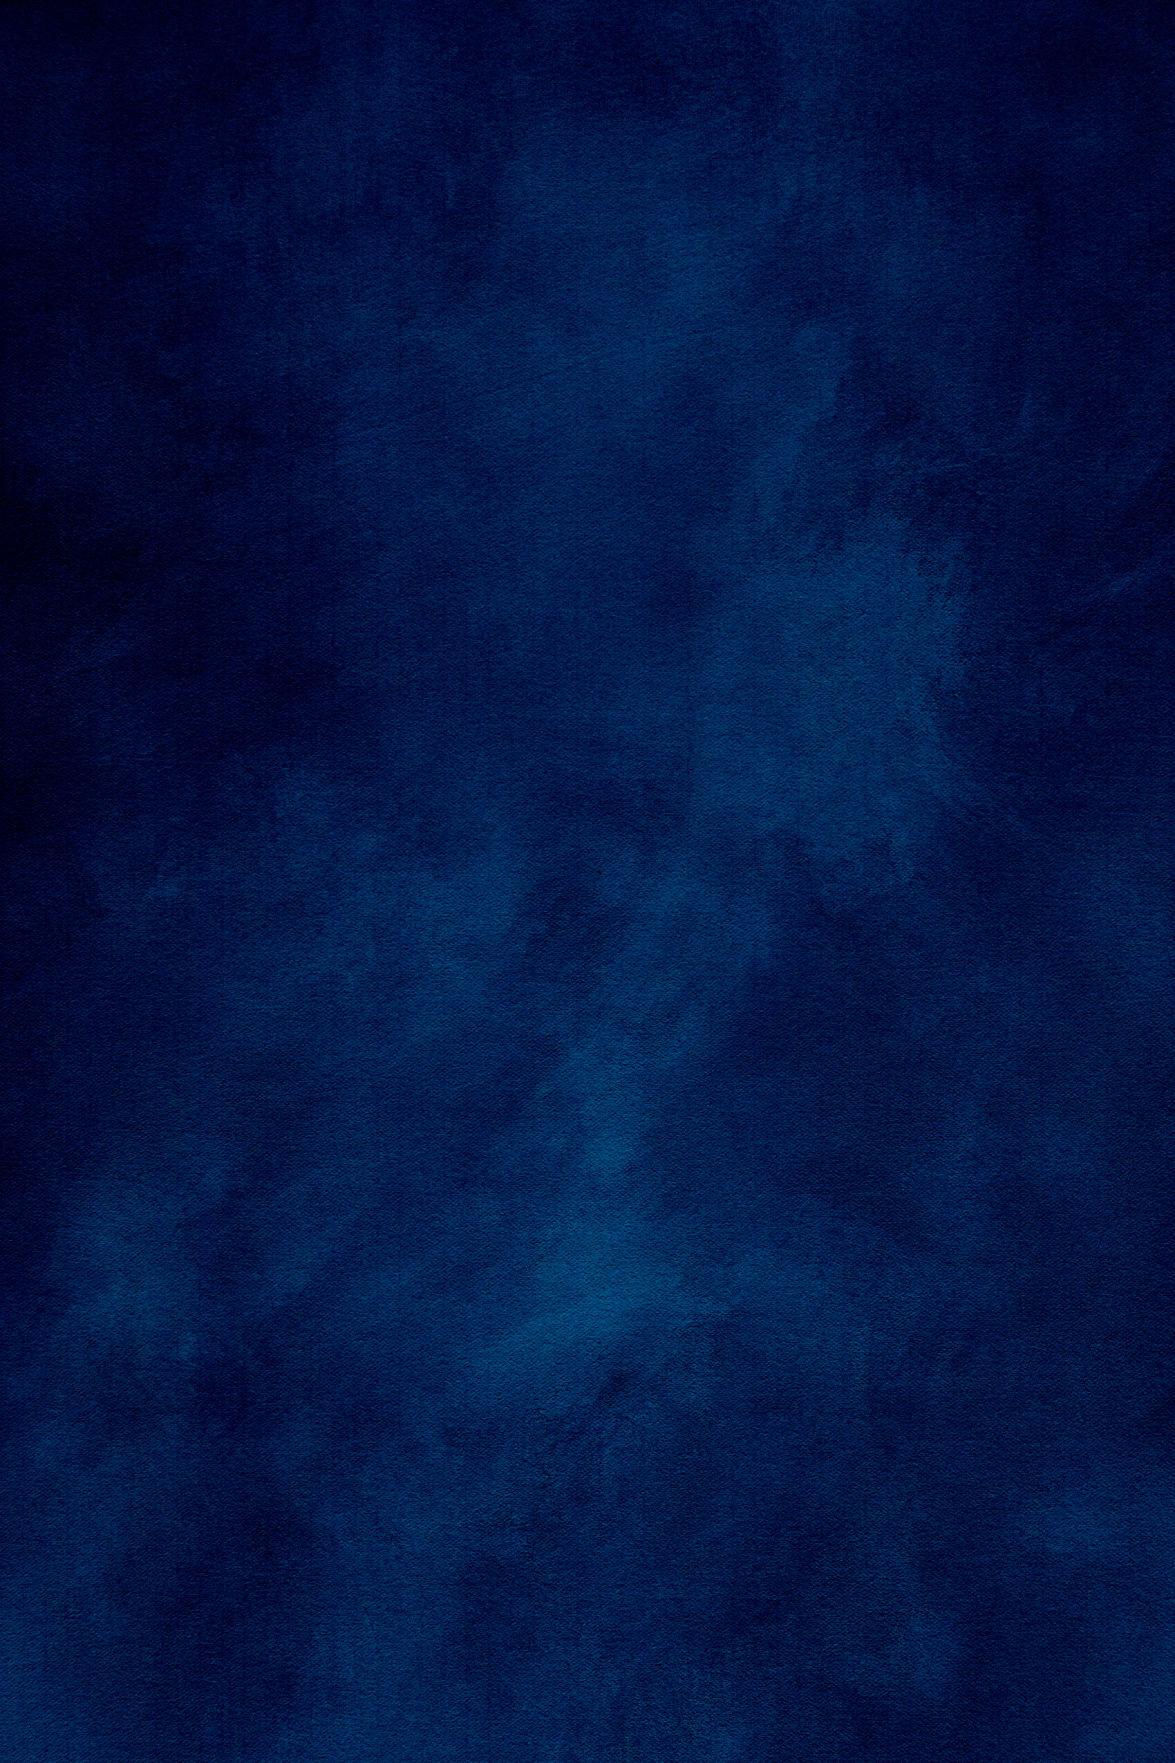 Texture For Artwork And Photography Abstract Royal Blue | Free Download ...